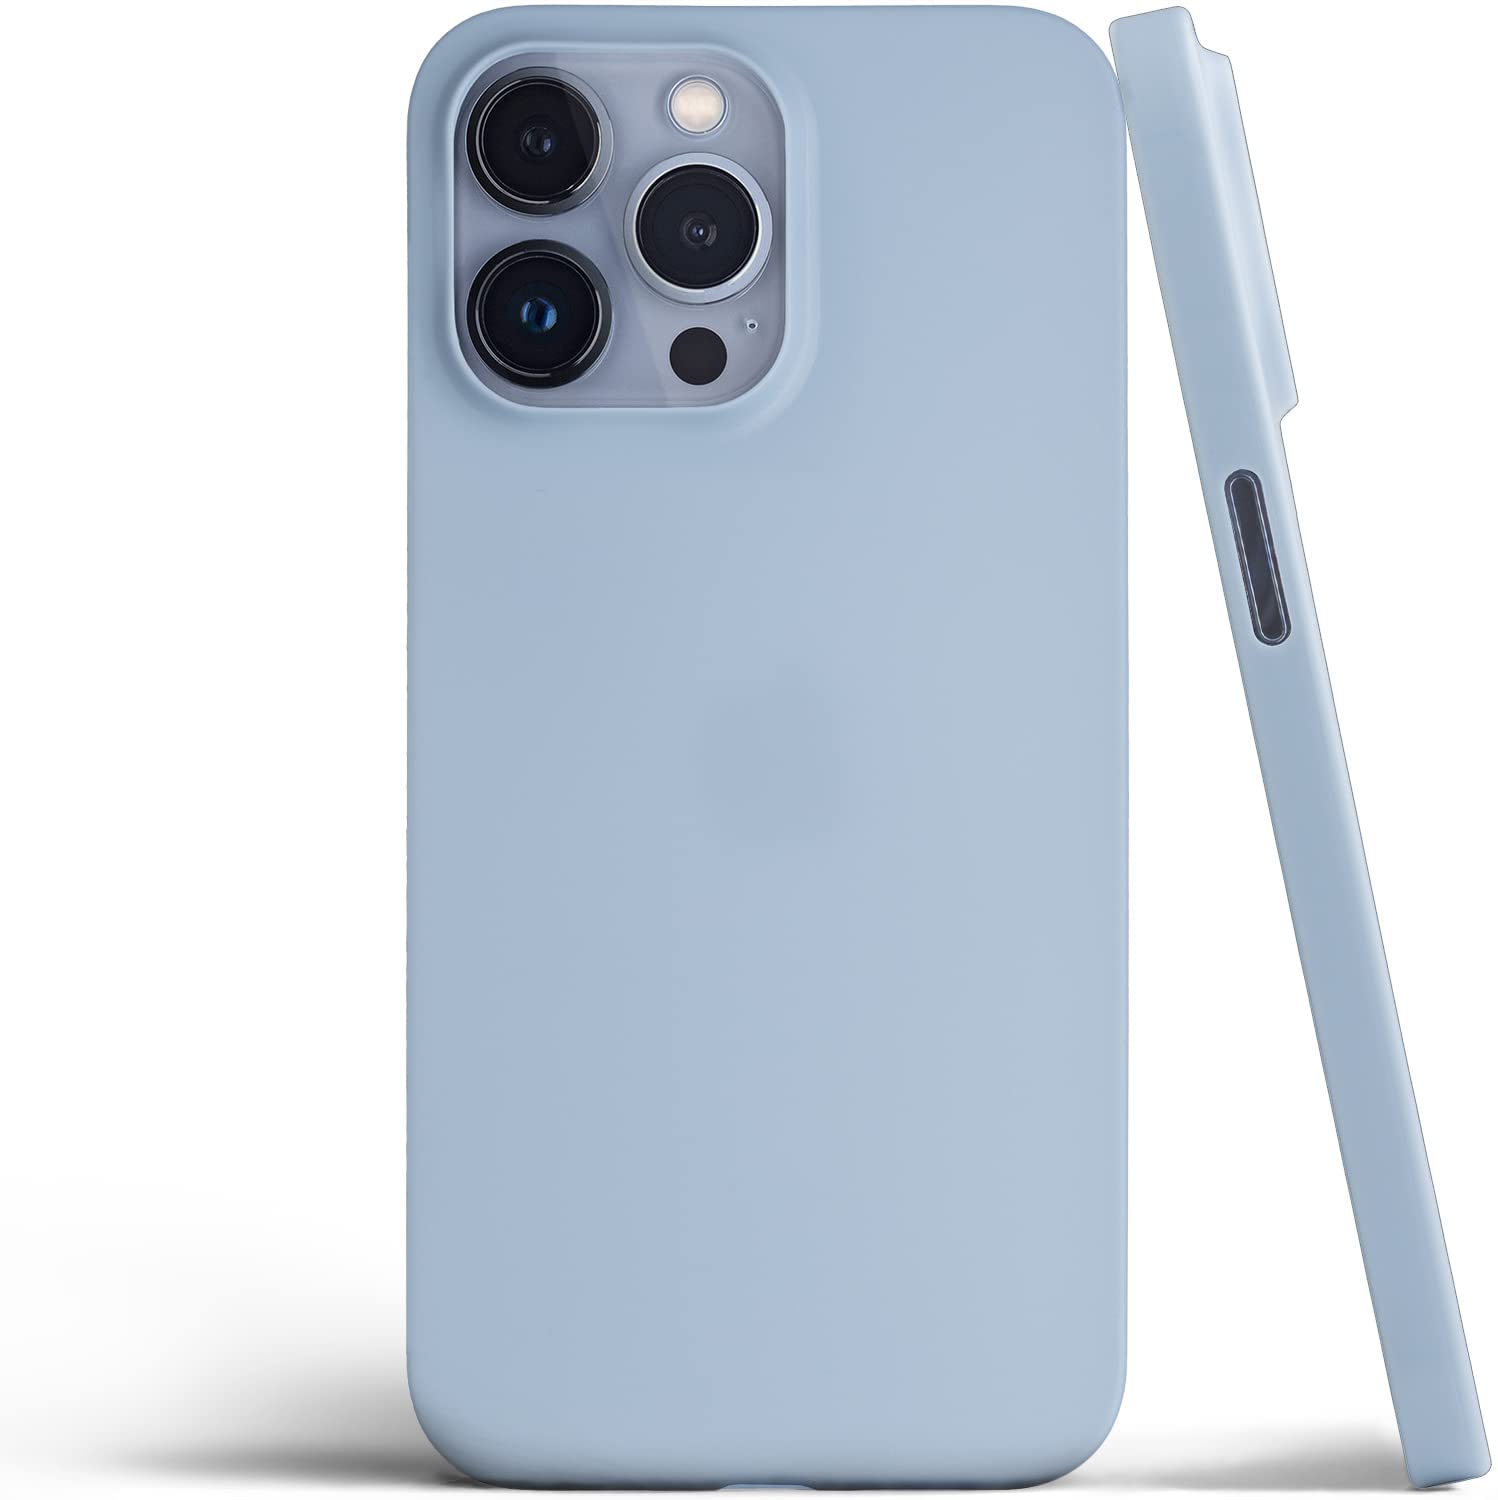 Totallee's marketing image showcasing its Sierra Blue smartphone case on Sierra Blue iPhone 13 Pro, back and profile views